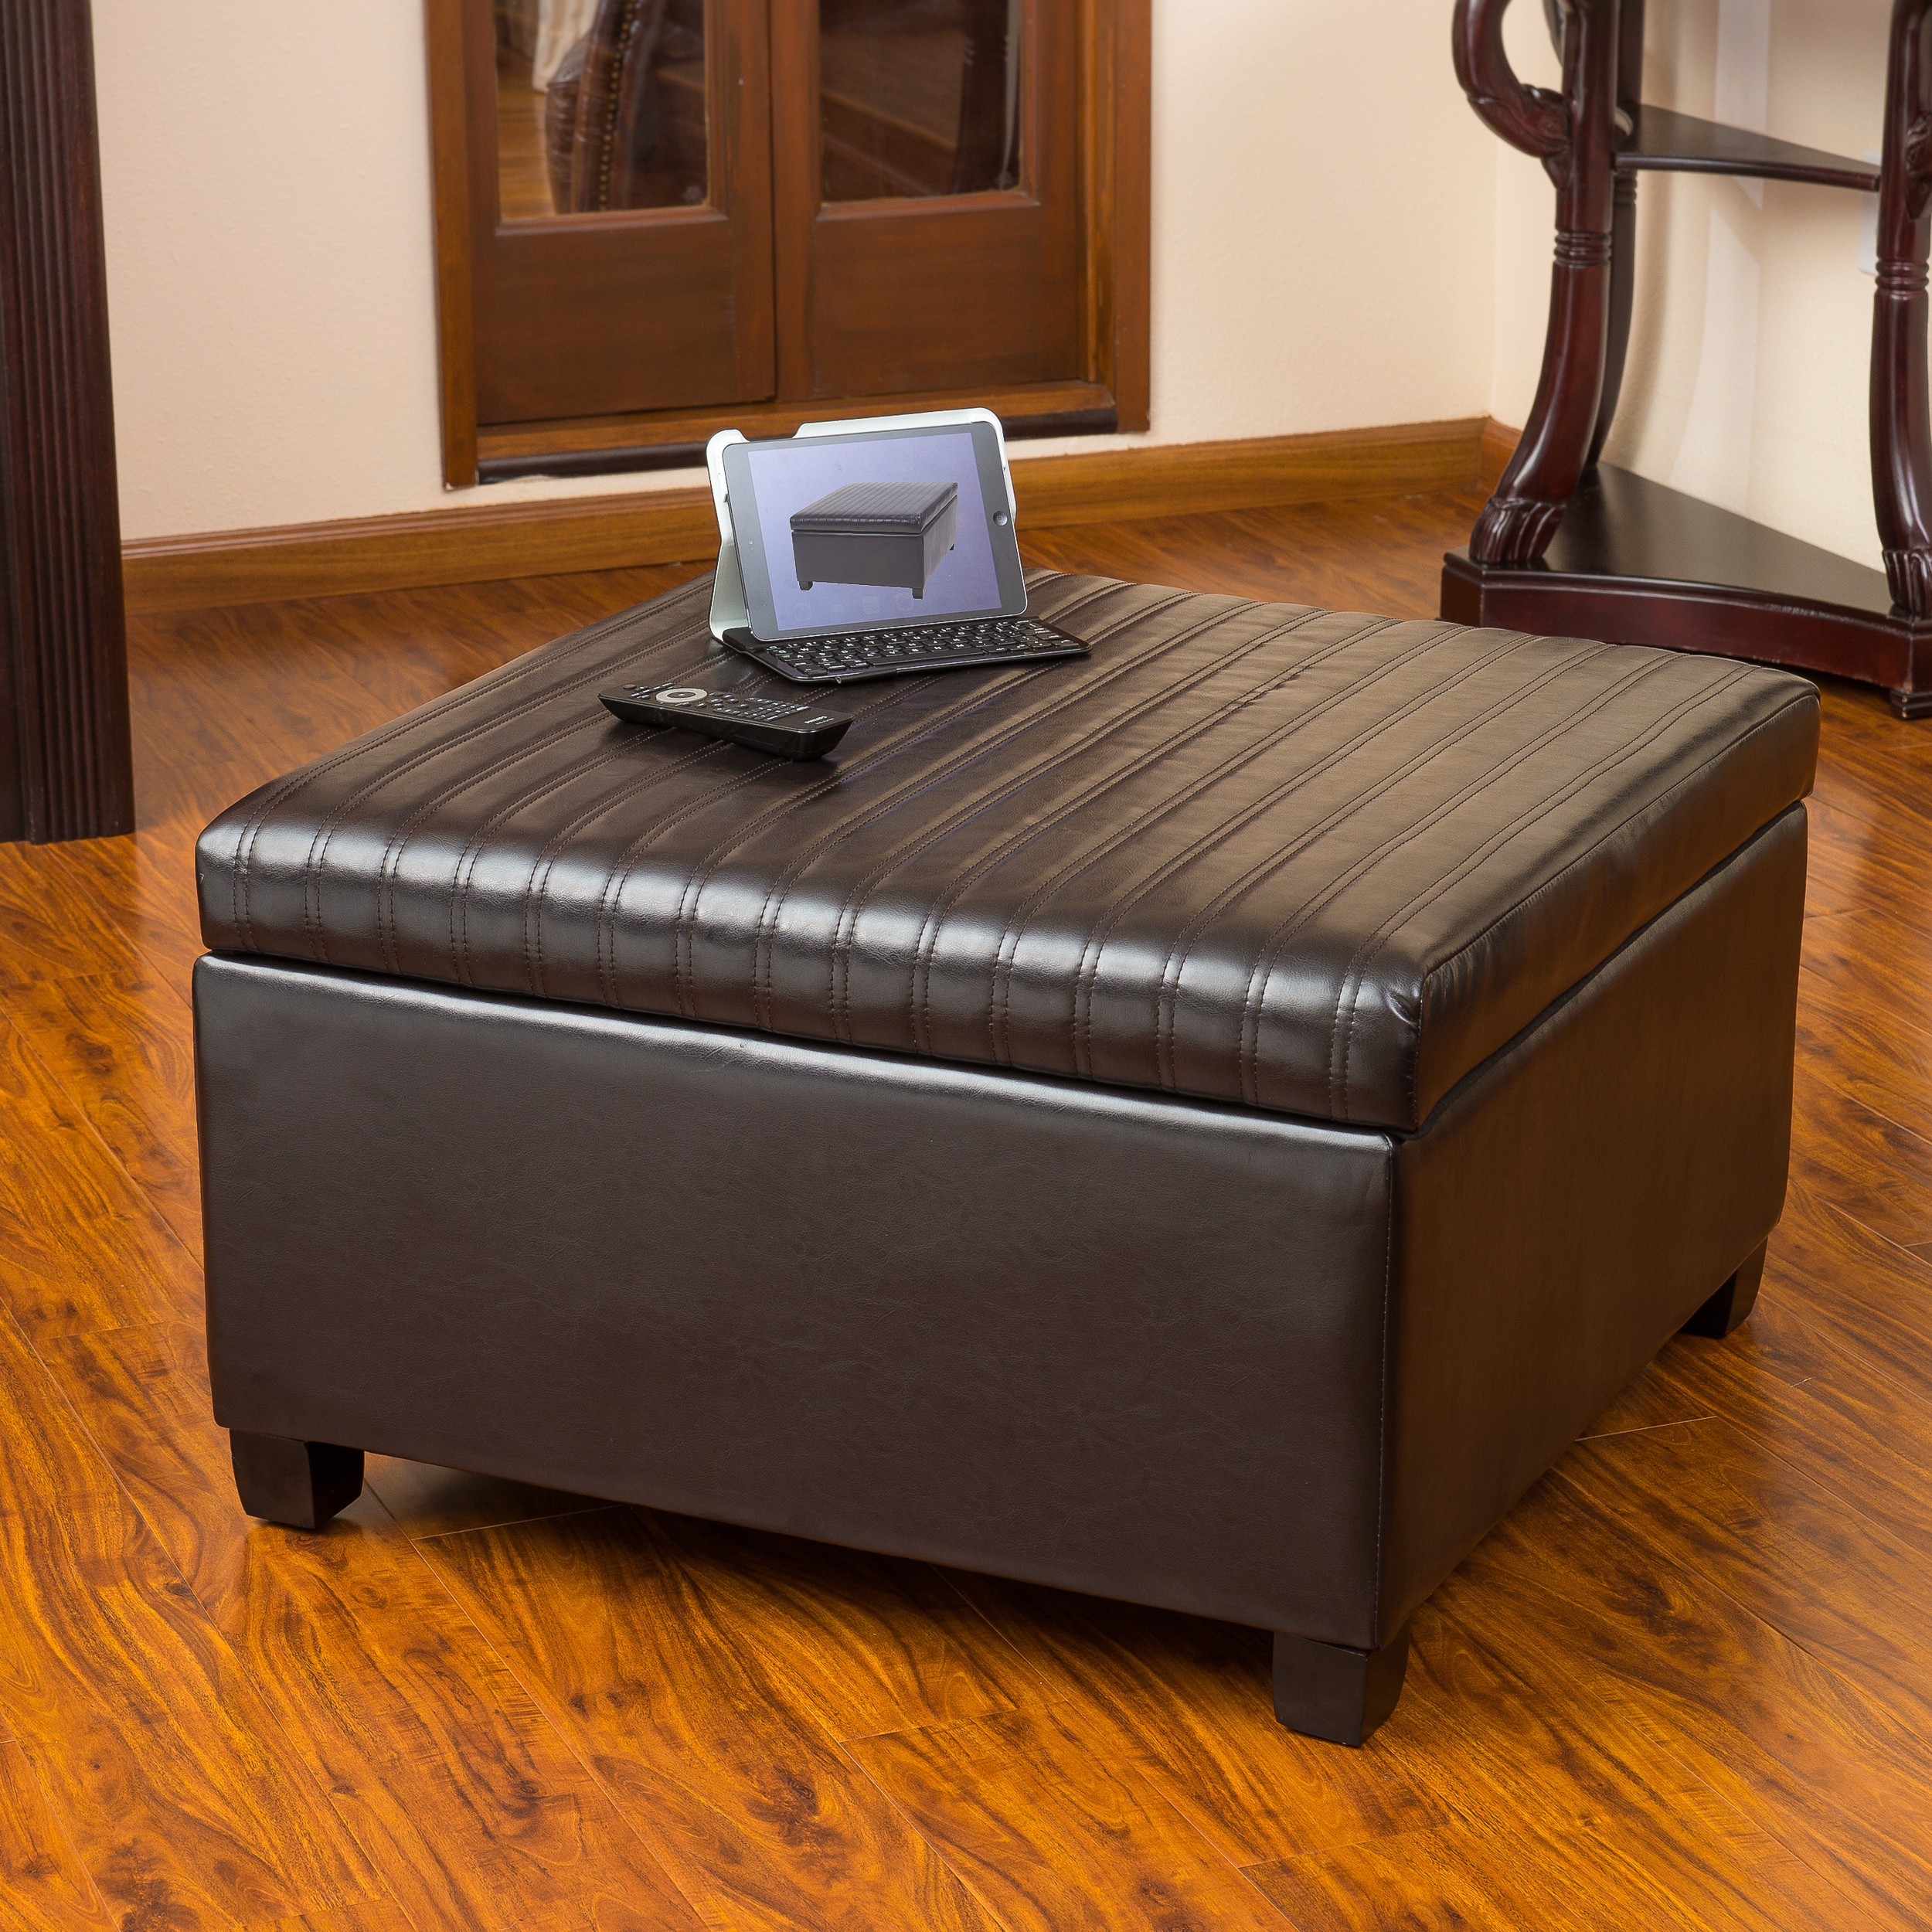 Christopher Knight Home Cano Espresso Leather Storage Ottoman (EspressoFeatures Storage unitUse for extra seating, as a coffee tableSome assembly requiredDimensions 18.50 inches high x 31 inches wide x 31 inches deepInterior dimensions 11.5 inches high